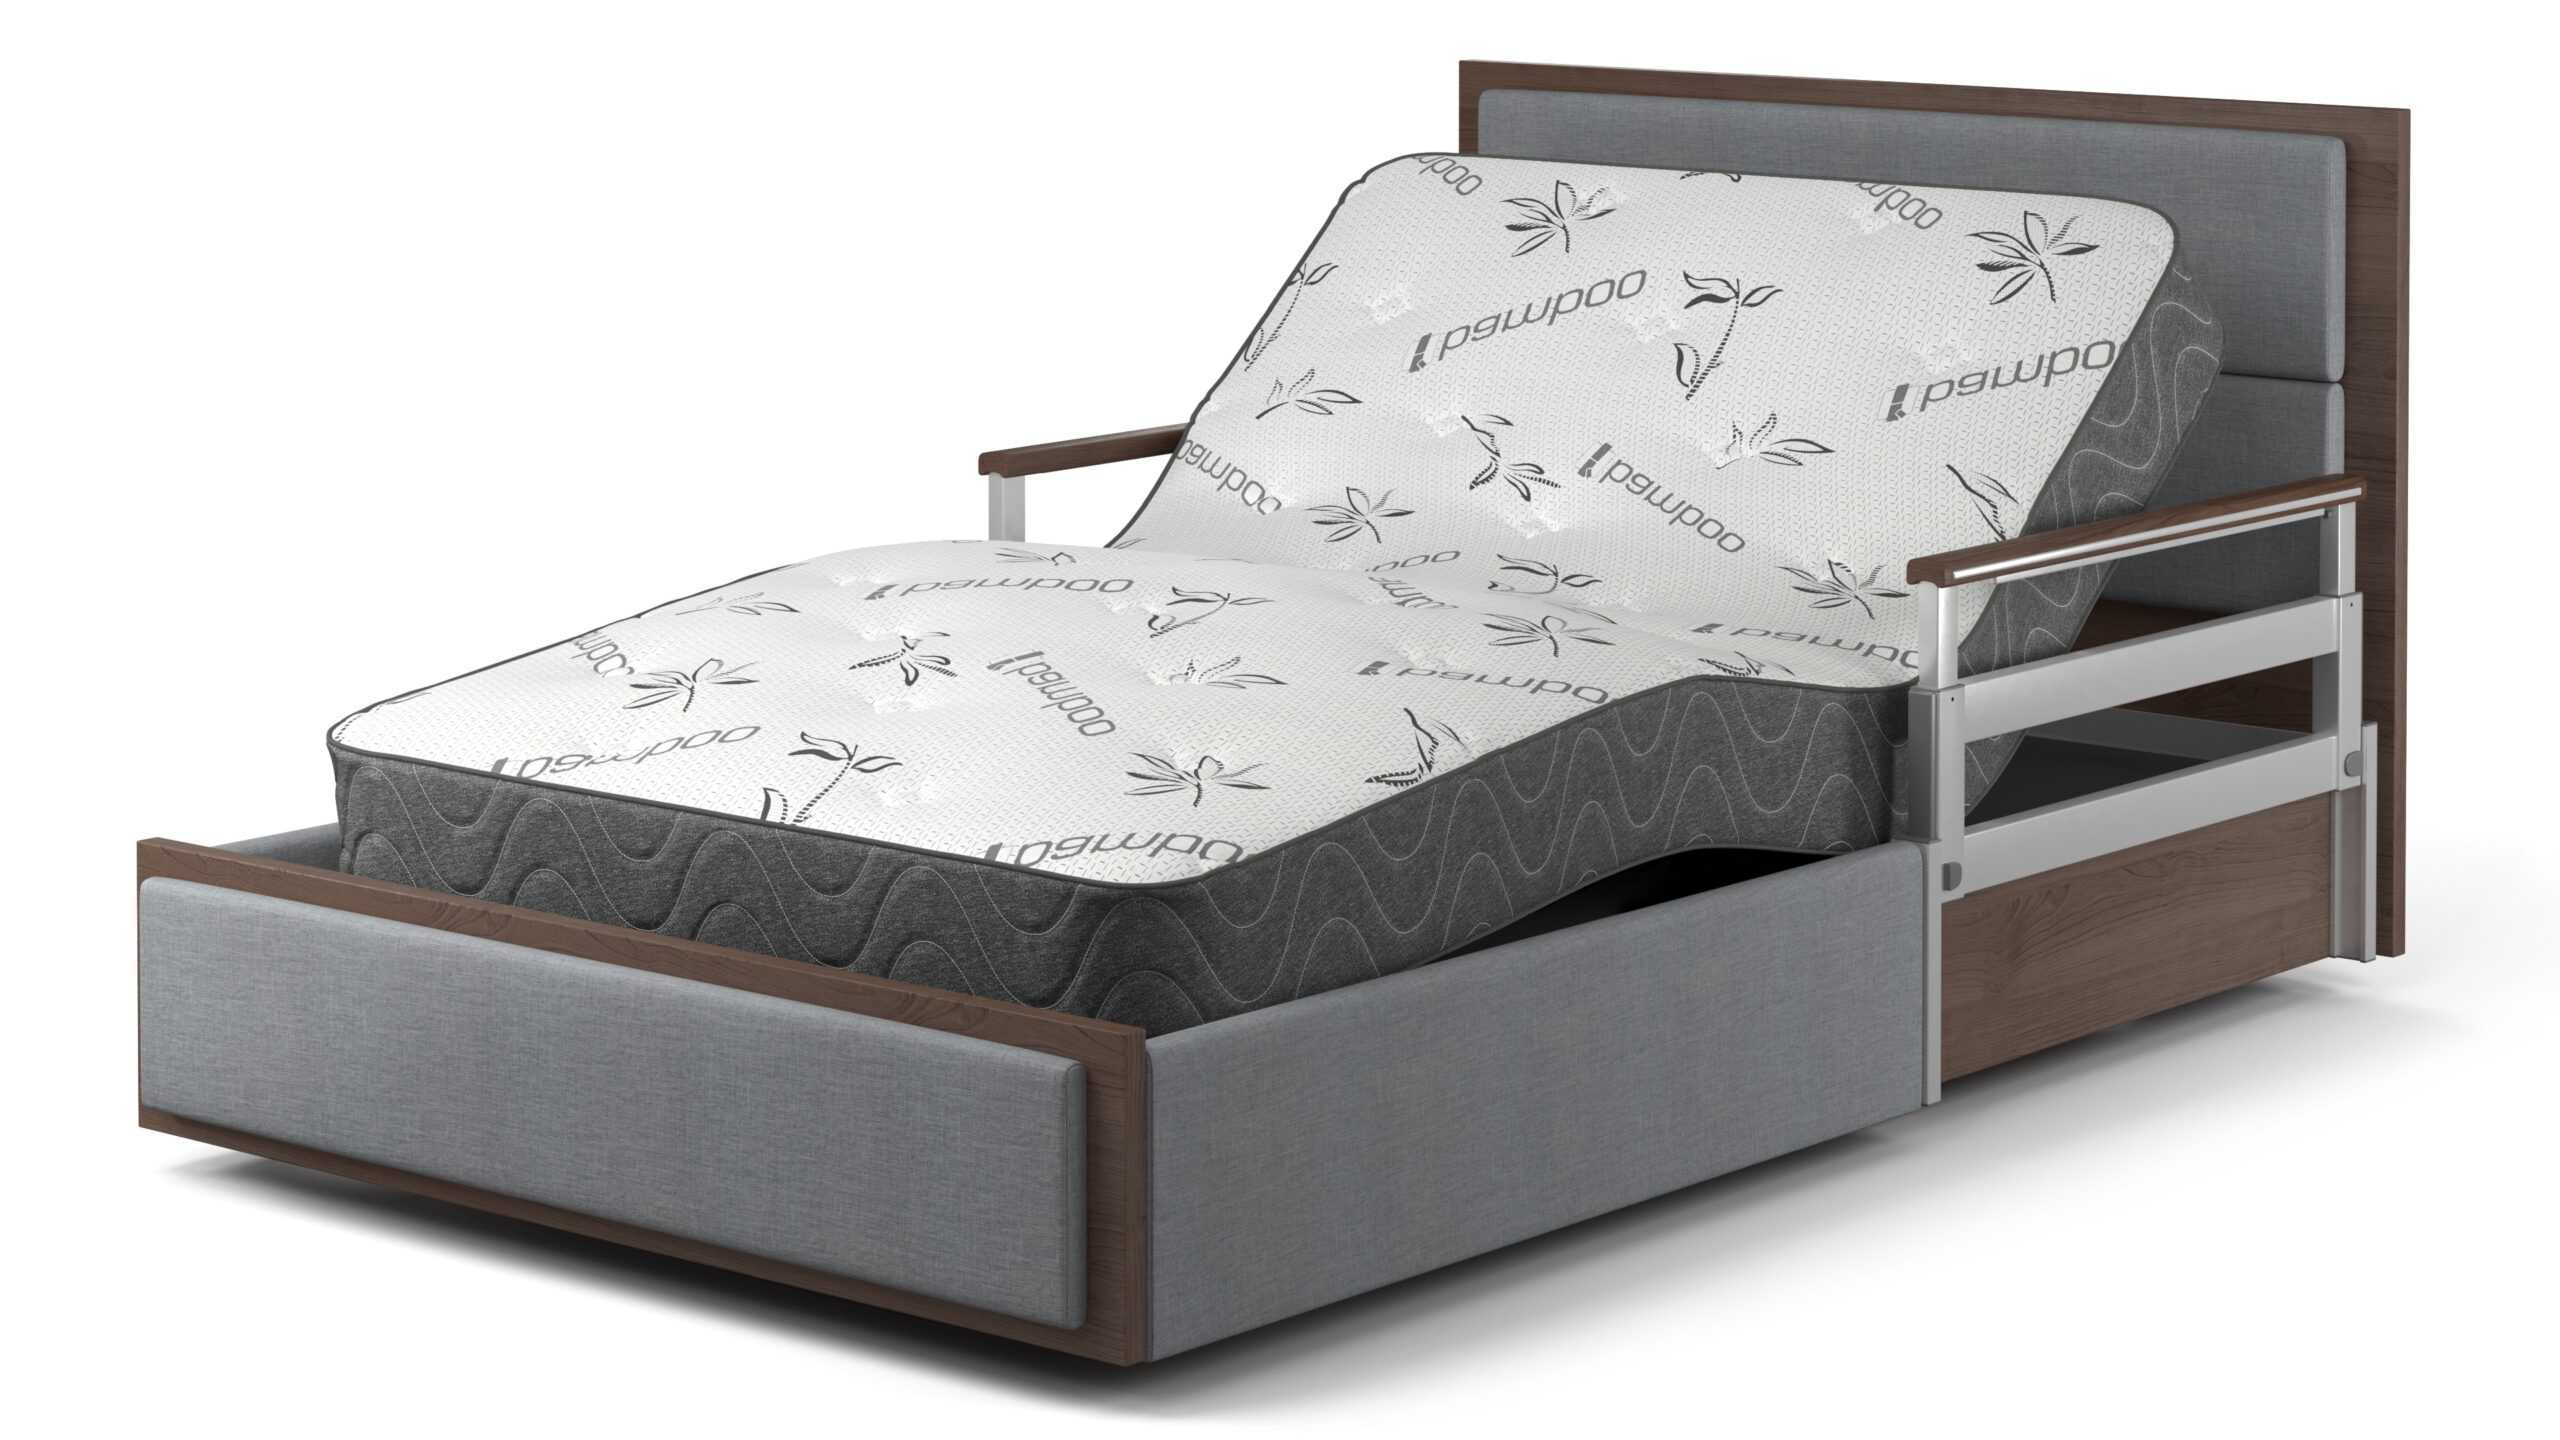 A bed with a mattress on top of it.